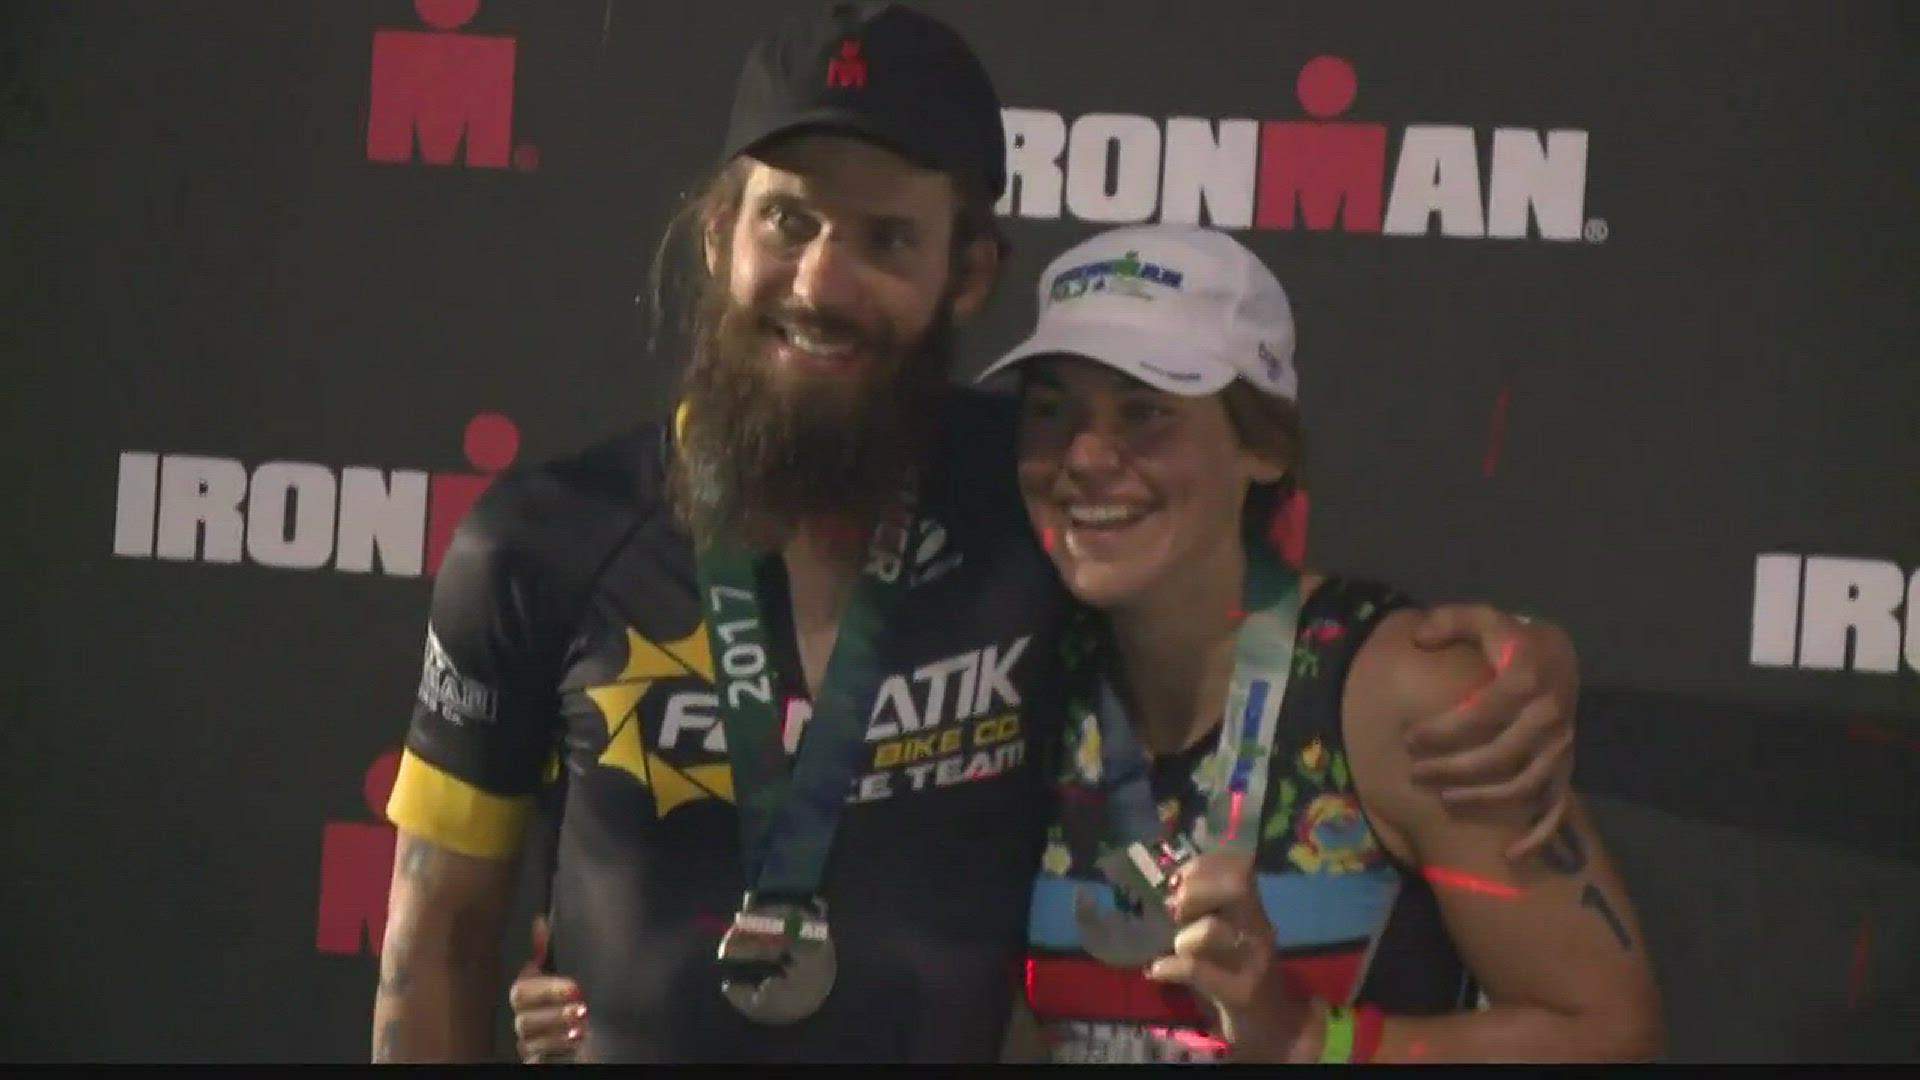 Man proposes to girlfriend after they both finish Ironman CDA